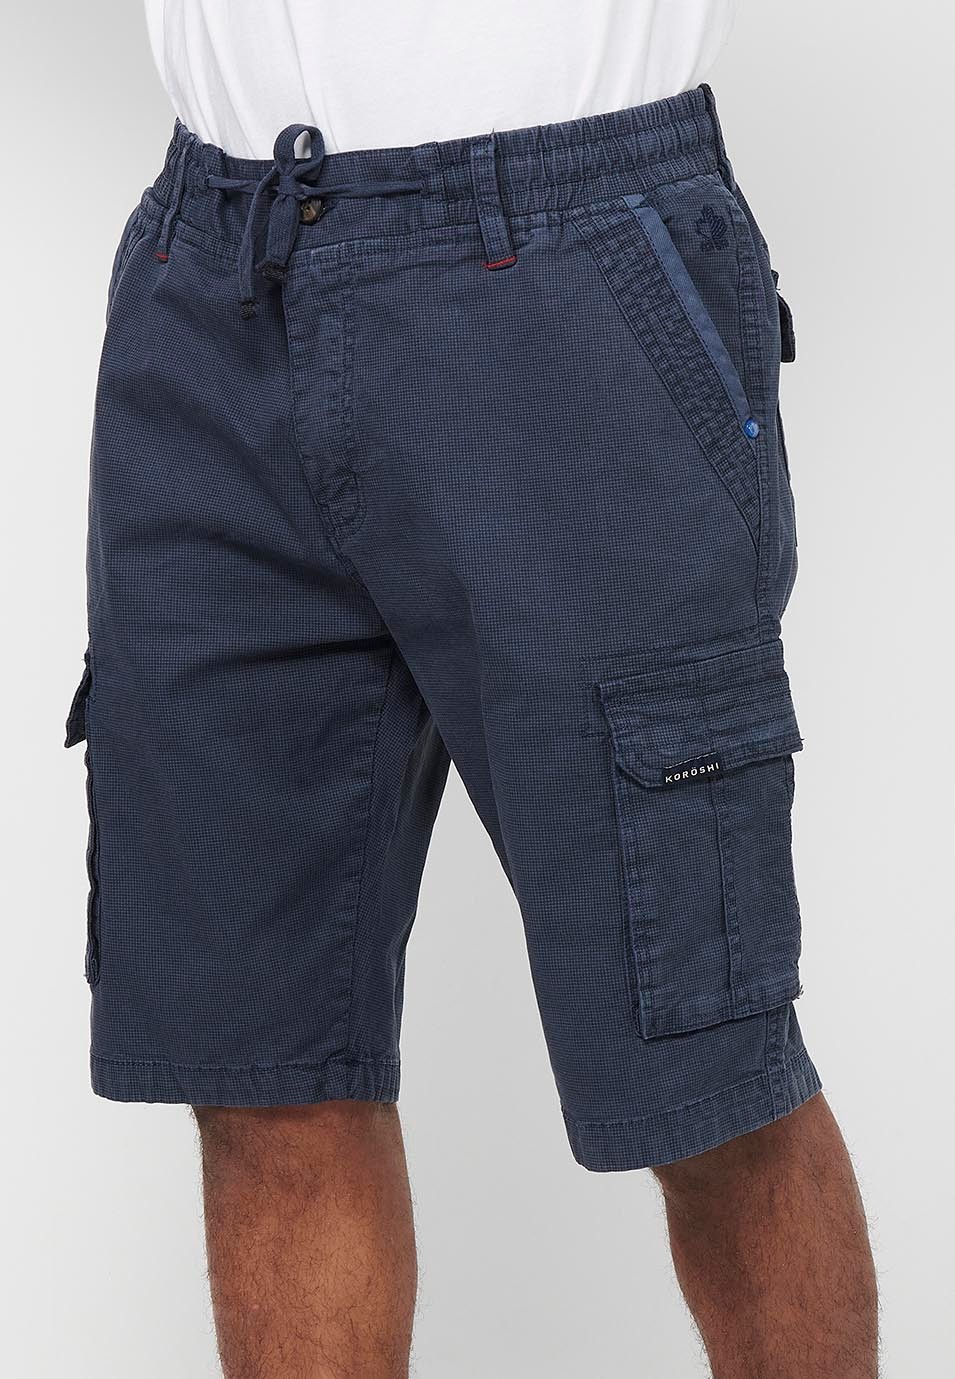 Cargo shorts with front closure with zipper and button and four pockets, two rear pockets with flap with two cargo pockets with flap and adjustable waist with drawstring in Navy Color for Men 4